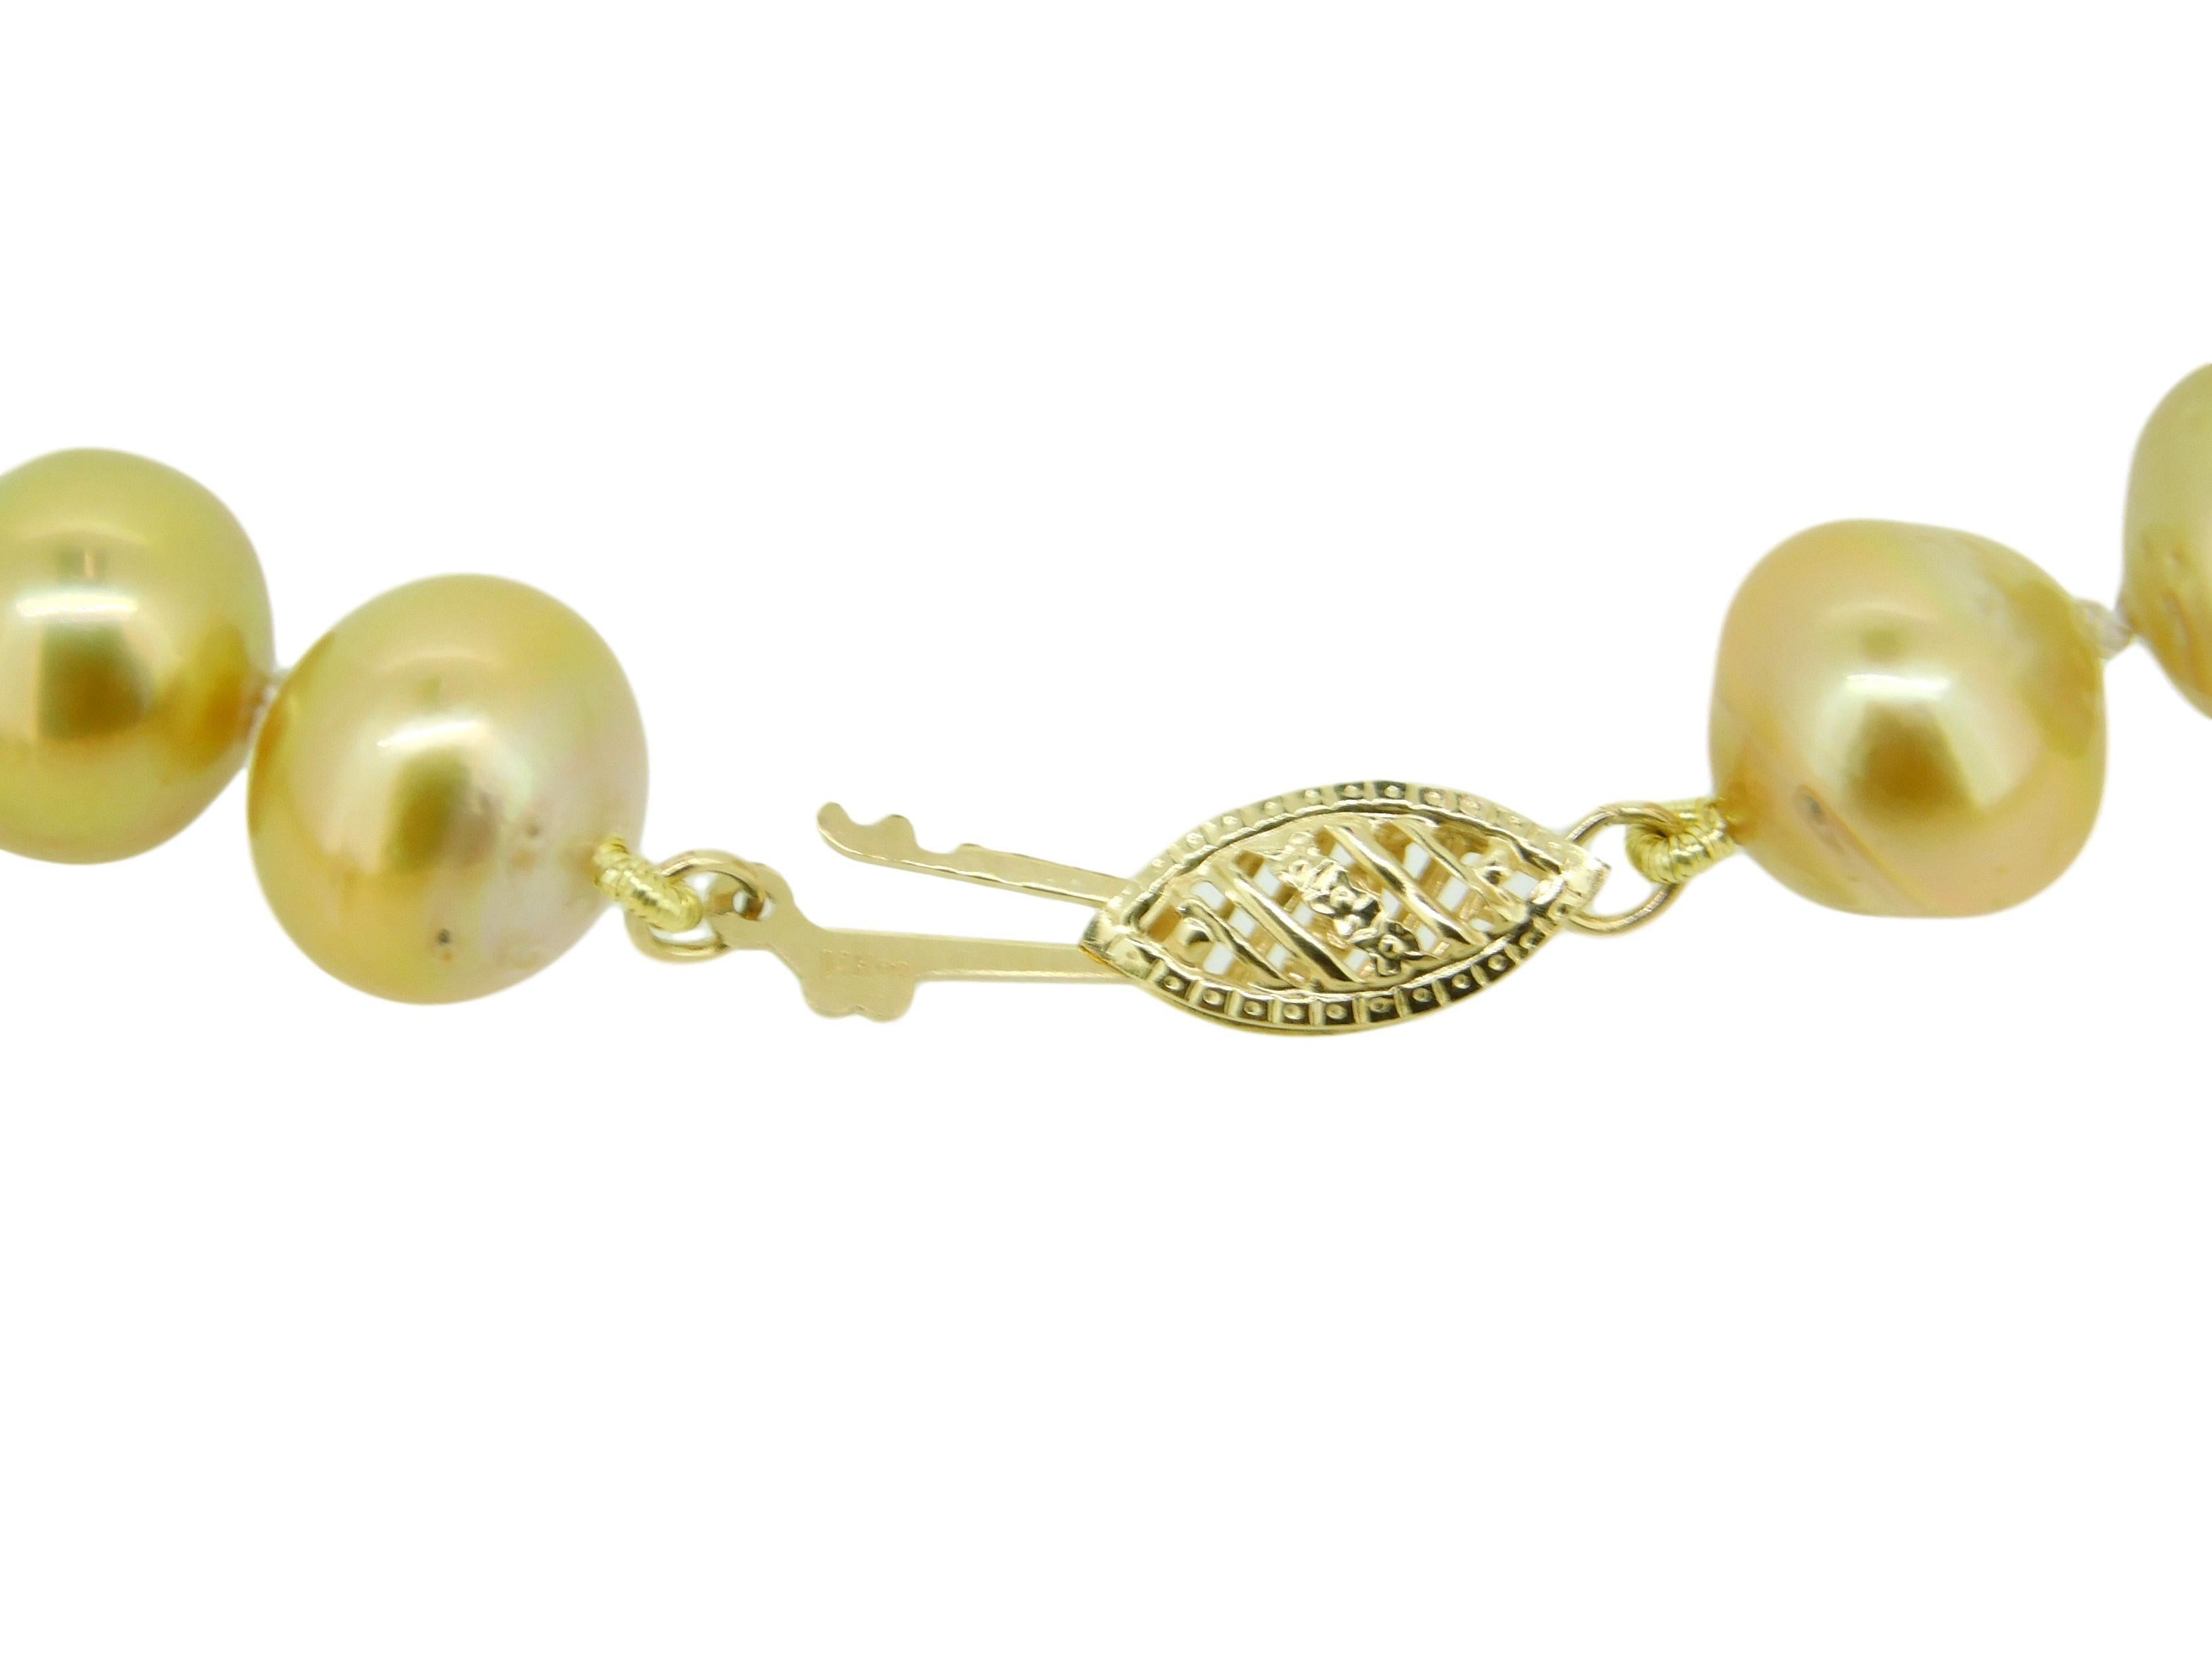 Round Cut Golden South Sea Strand of Pearls Necklace w/ 14k Yellow Gold Clasp '#J4569' For Sale